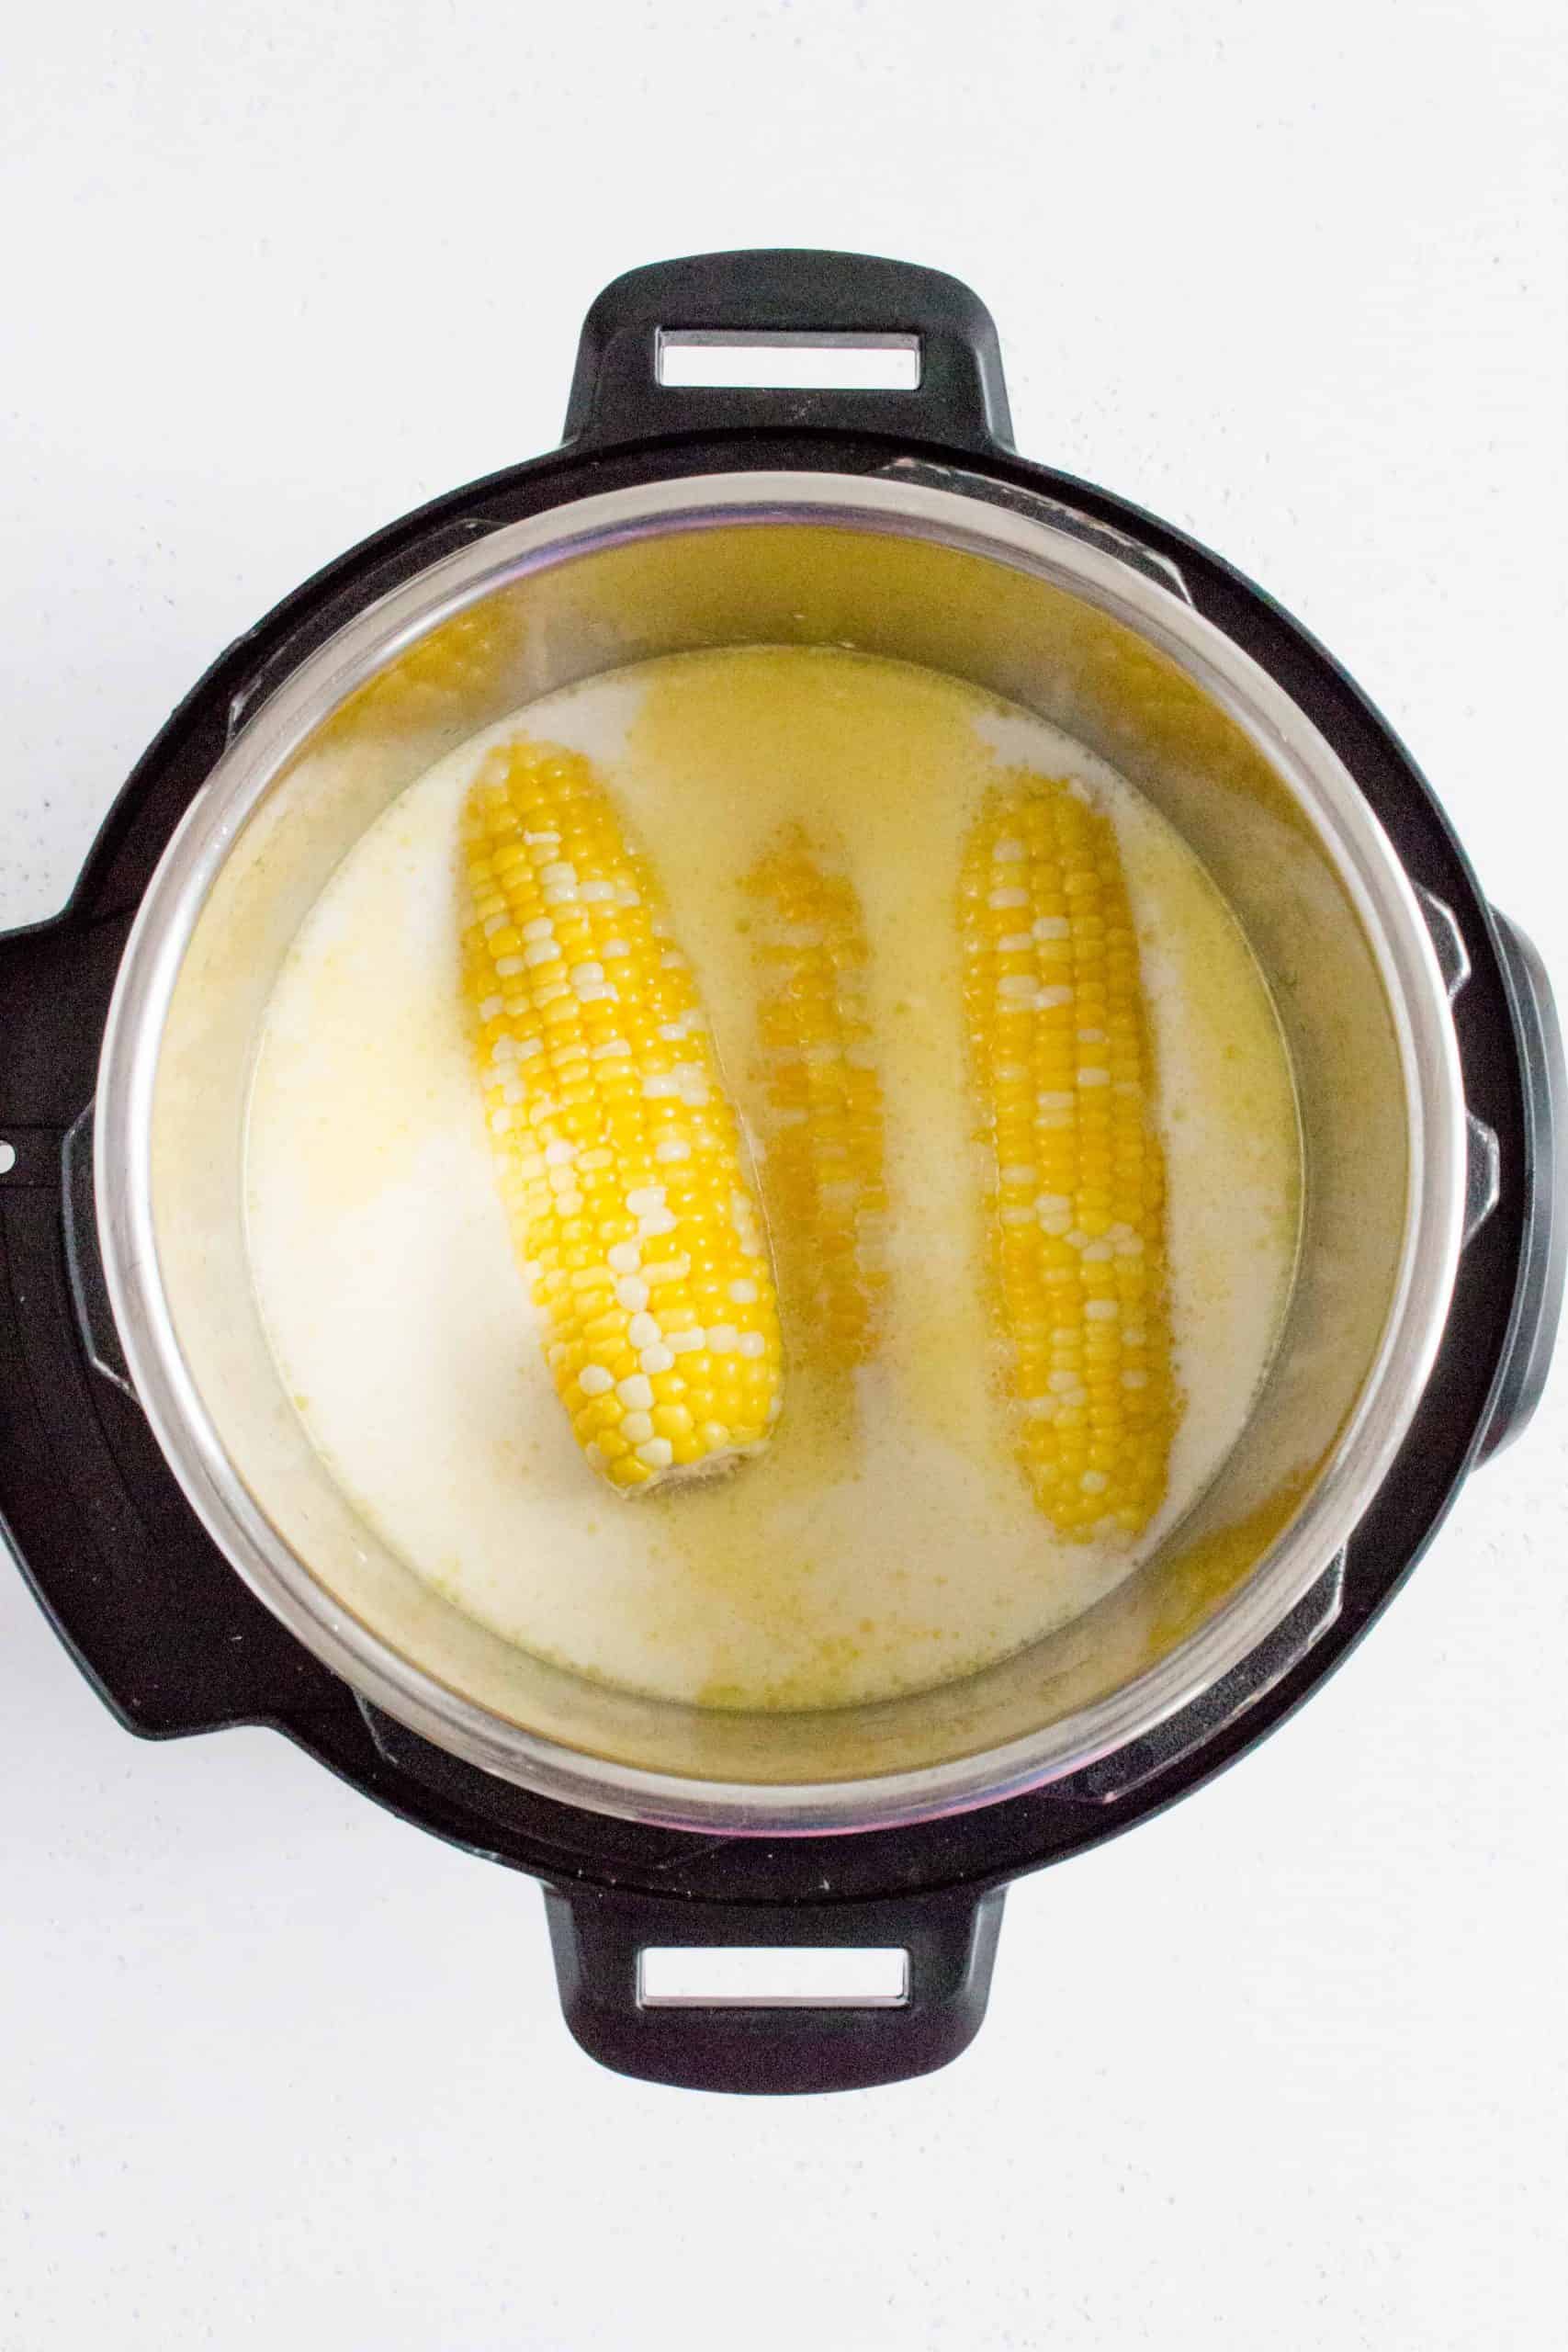 How To Make Corn on the Cob in the Instant Pot